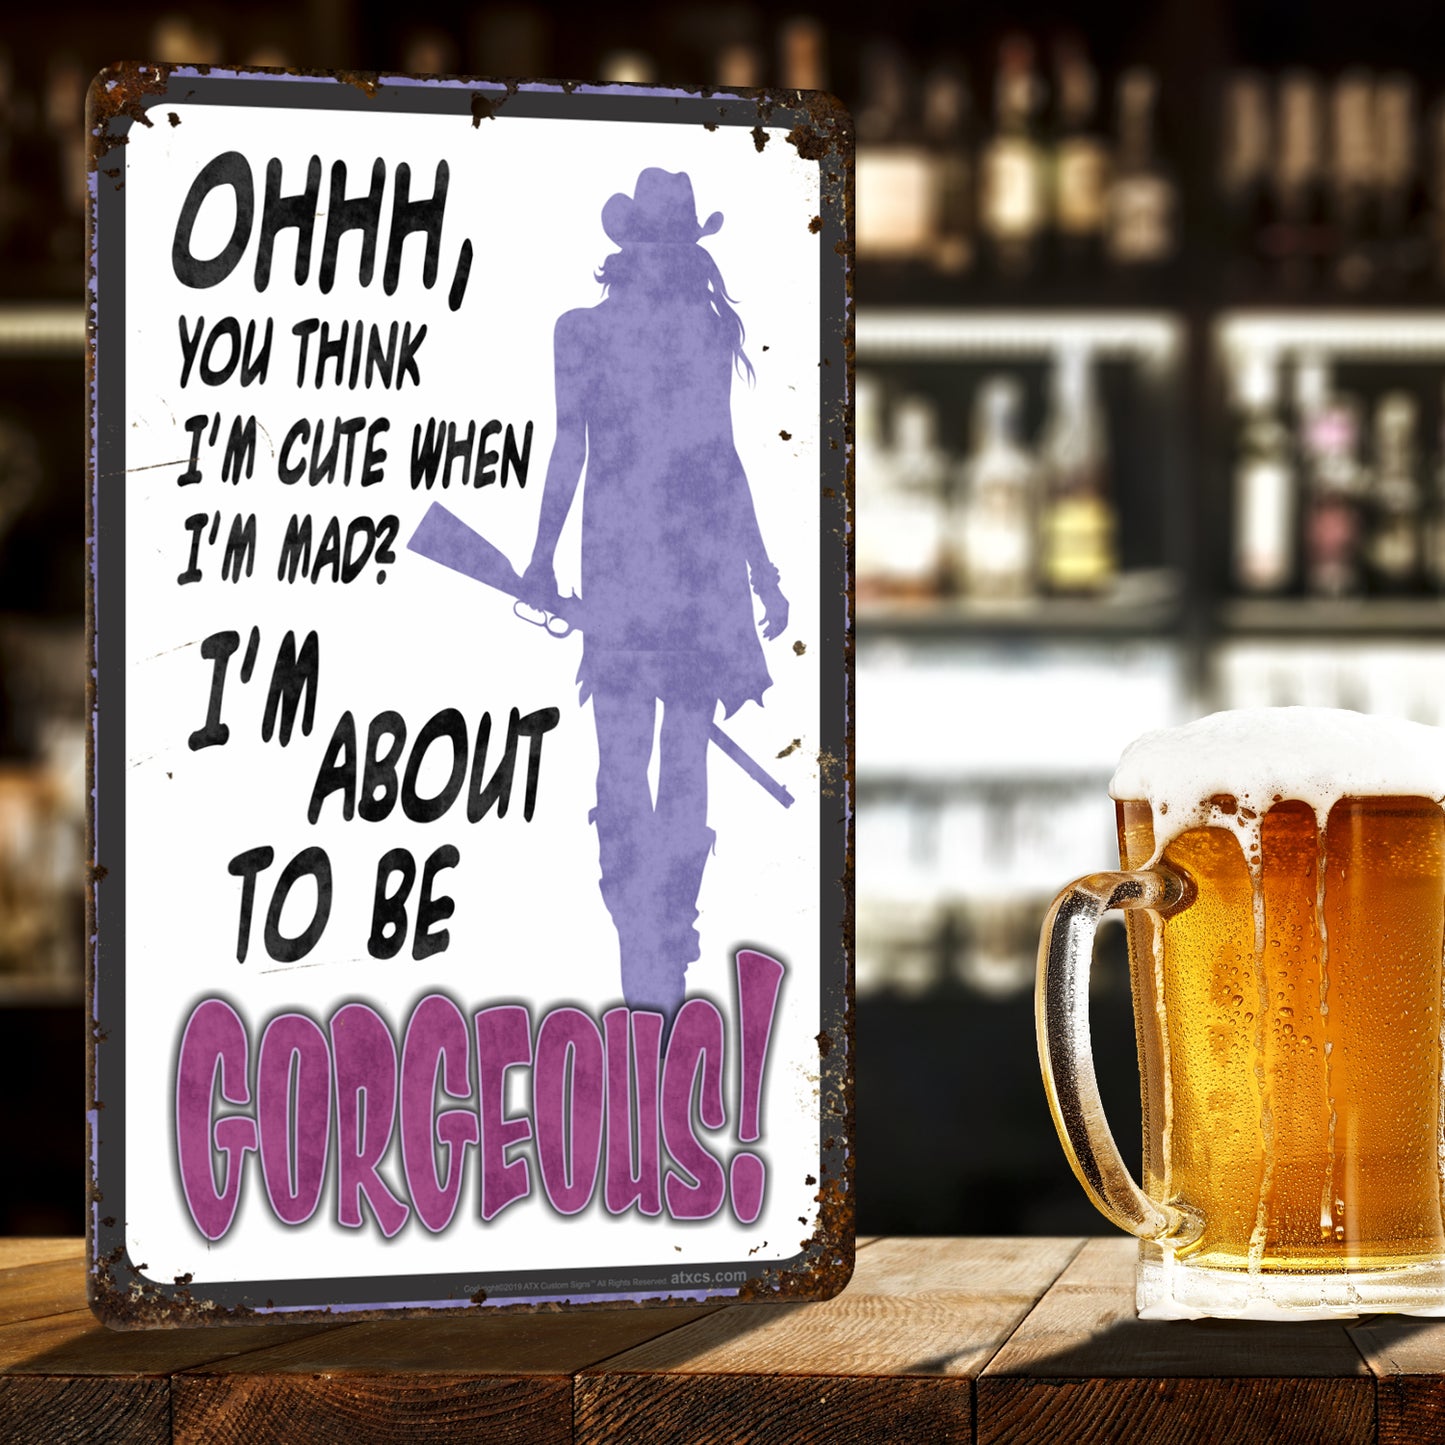 Funny Metal Warning Sign for Bars - Ohhh, You Think I'm Cute When Im mad? I'm About to be Gorgeous! (Purple Rustic Decor) - Size 8 x 12